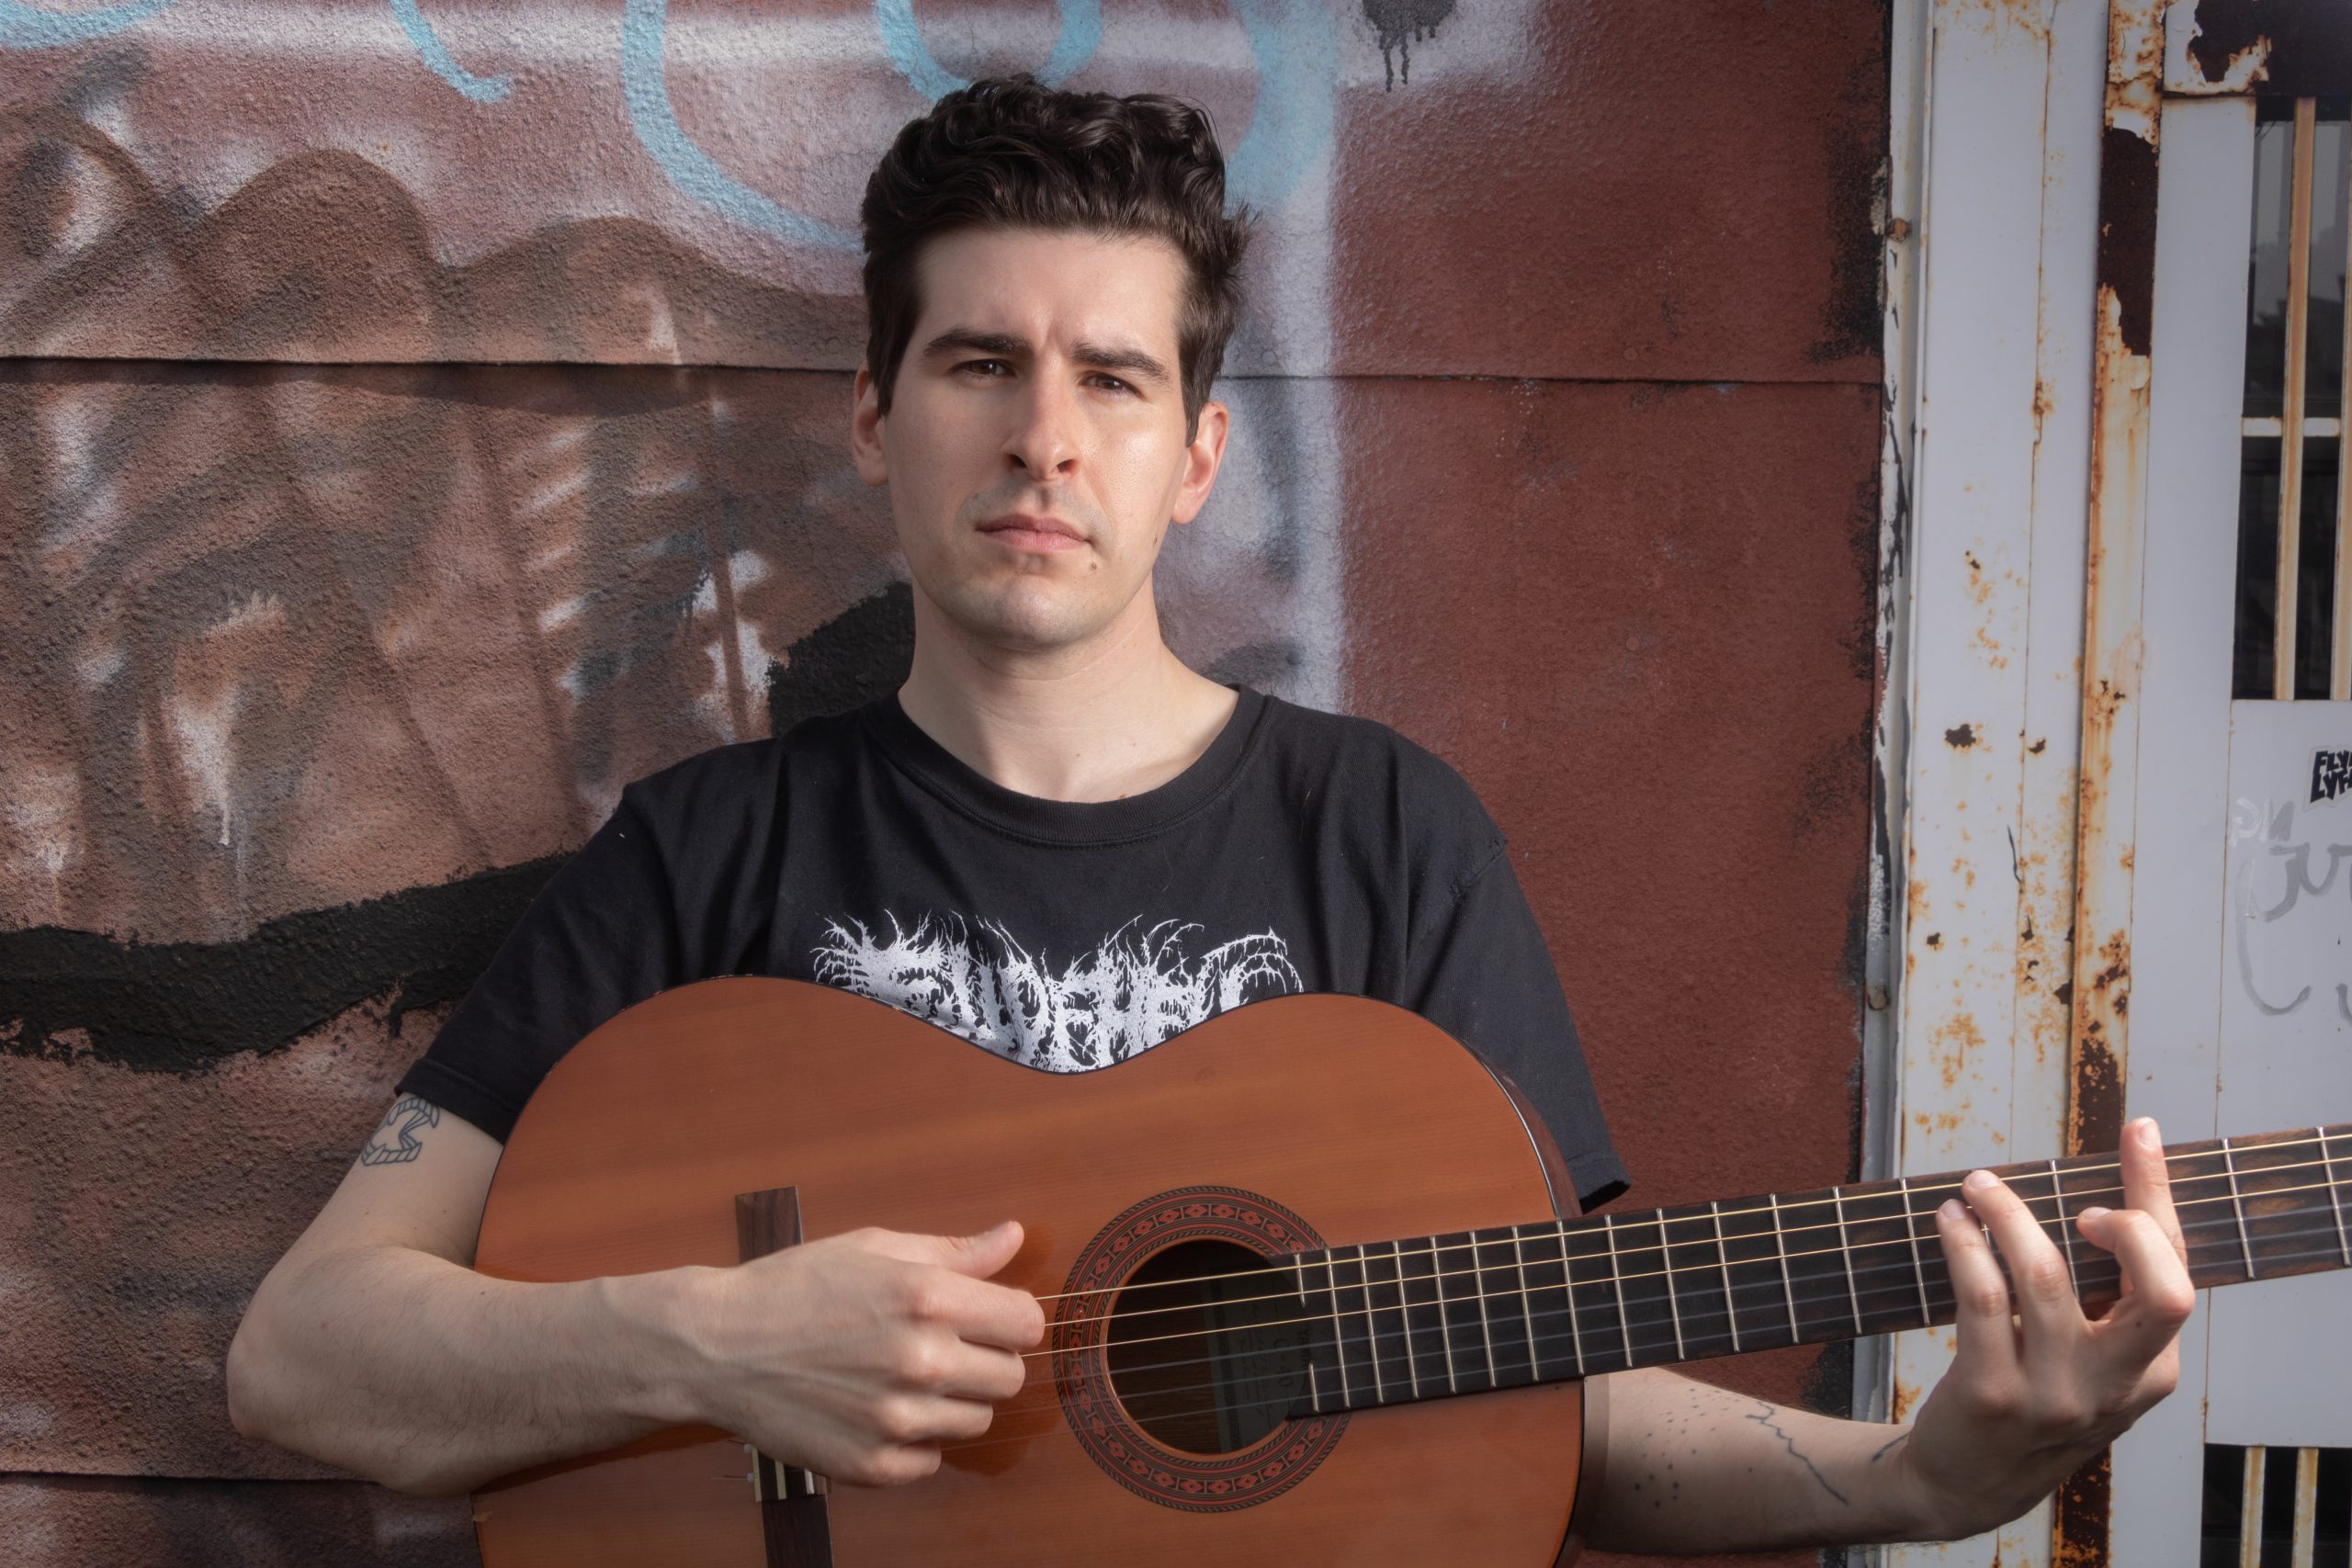 A man holds an acoustic guitar while leaning against a graffitied wall.